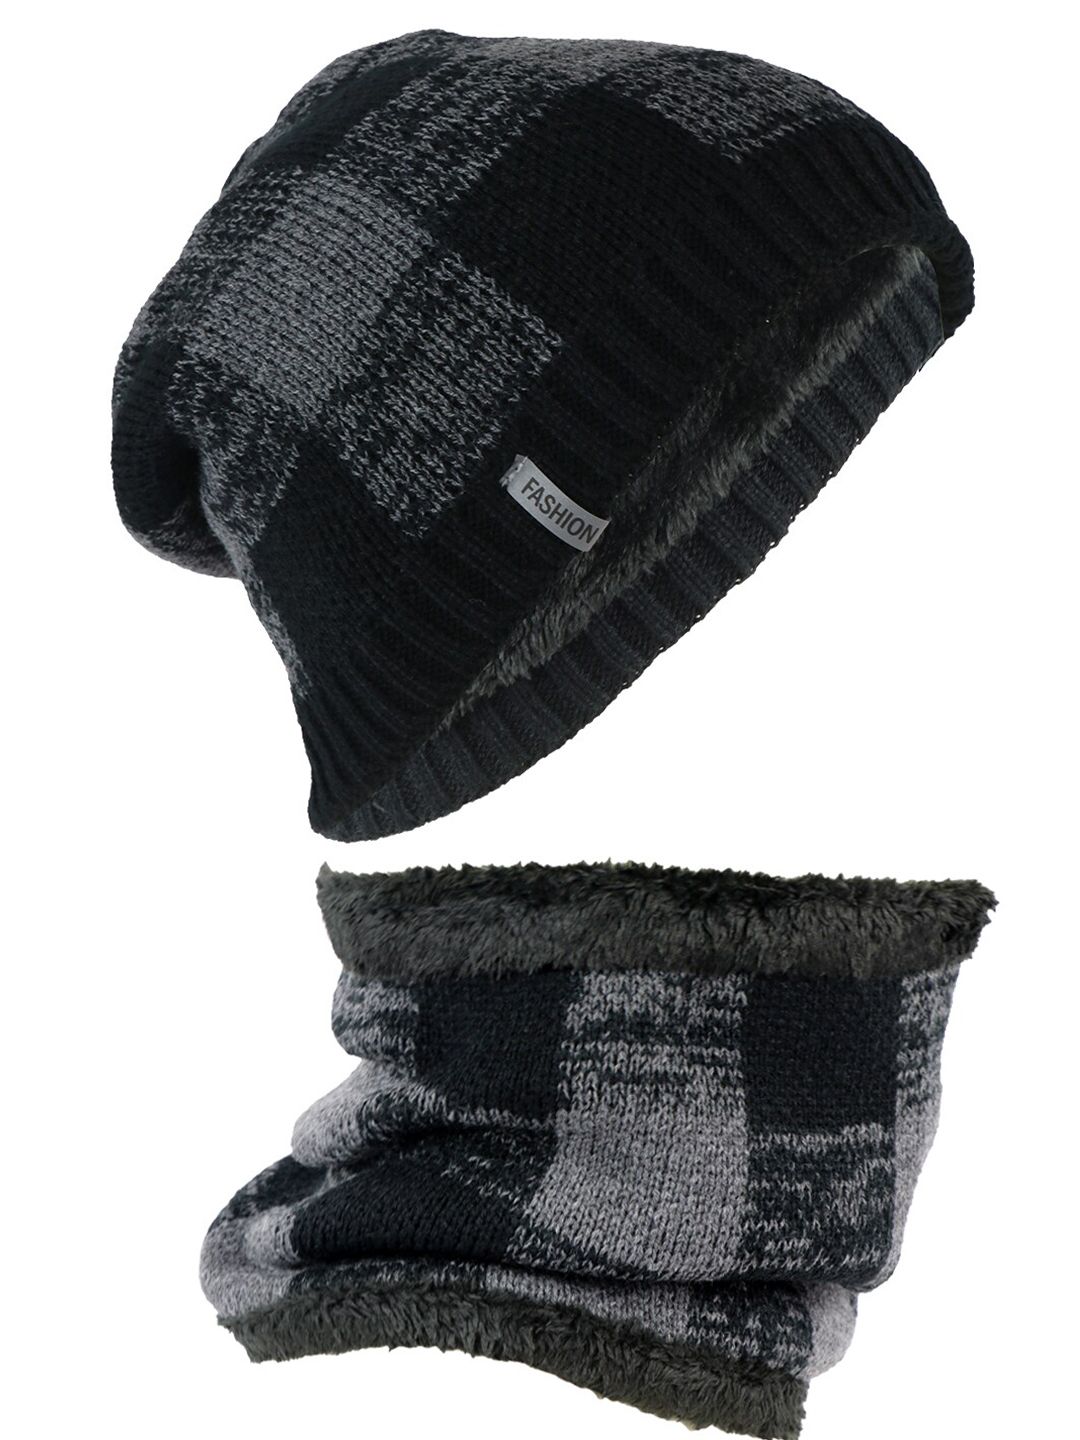 iSWEVEN Black & Grey Colourblocked Woolen Beanie with Neck Warmer Price in India